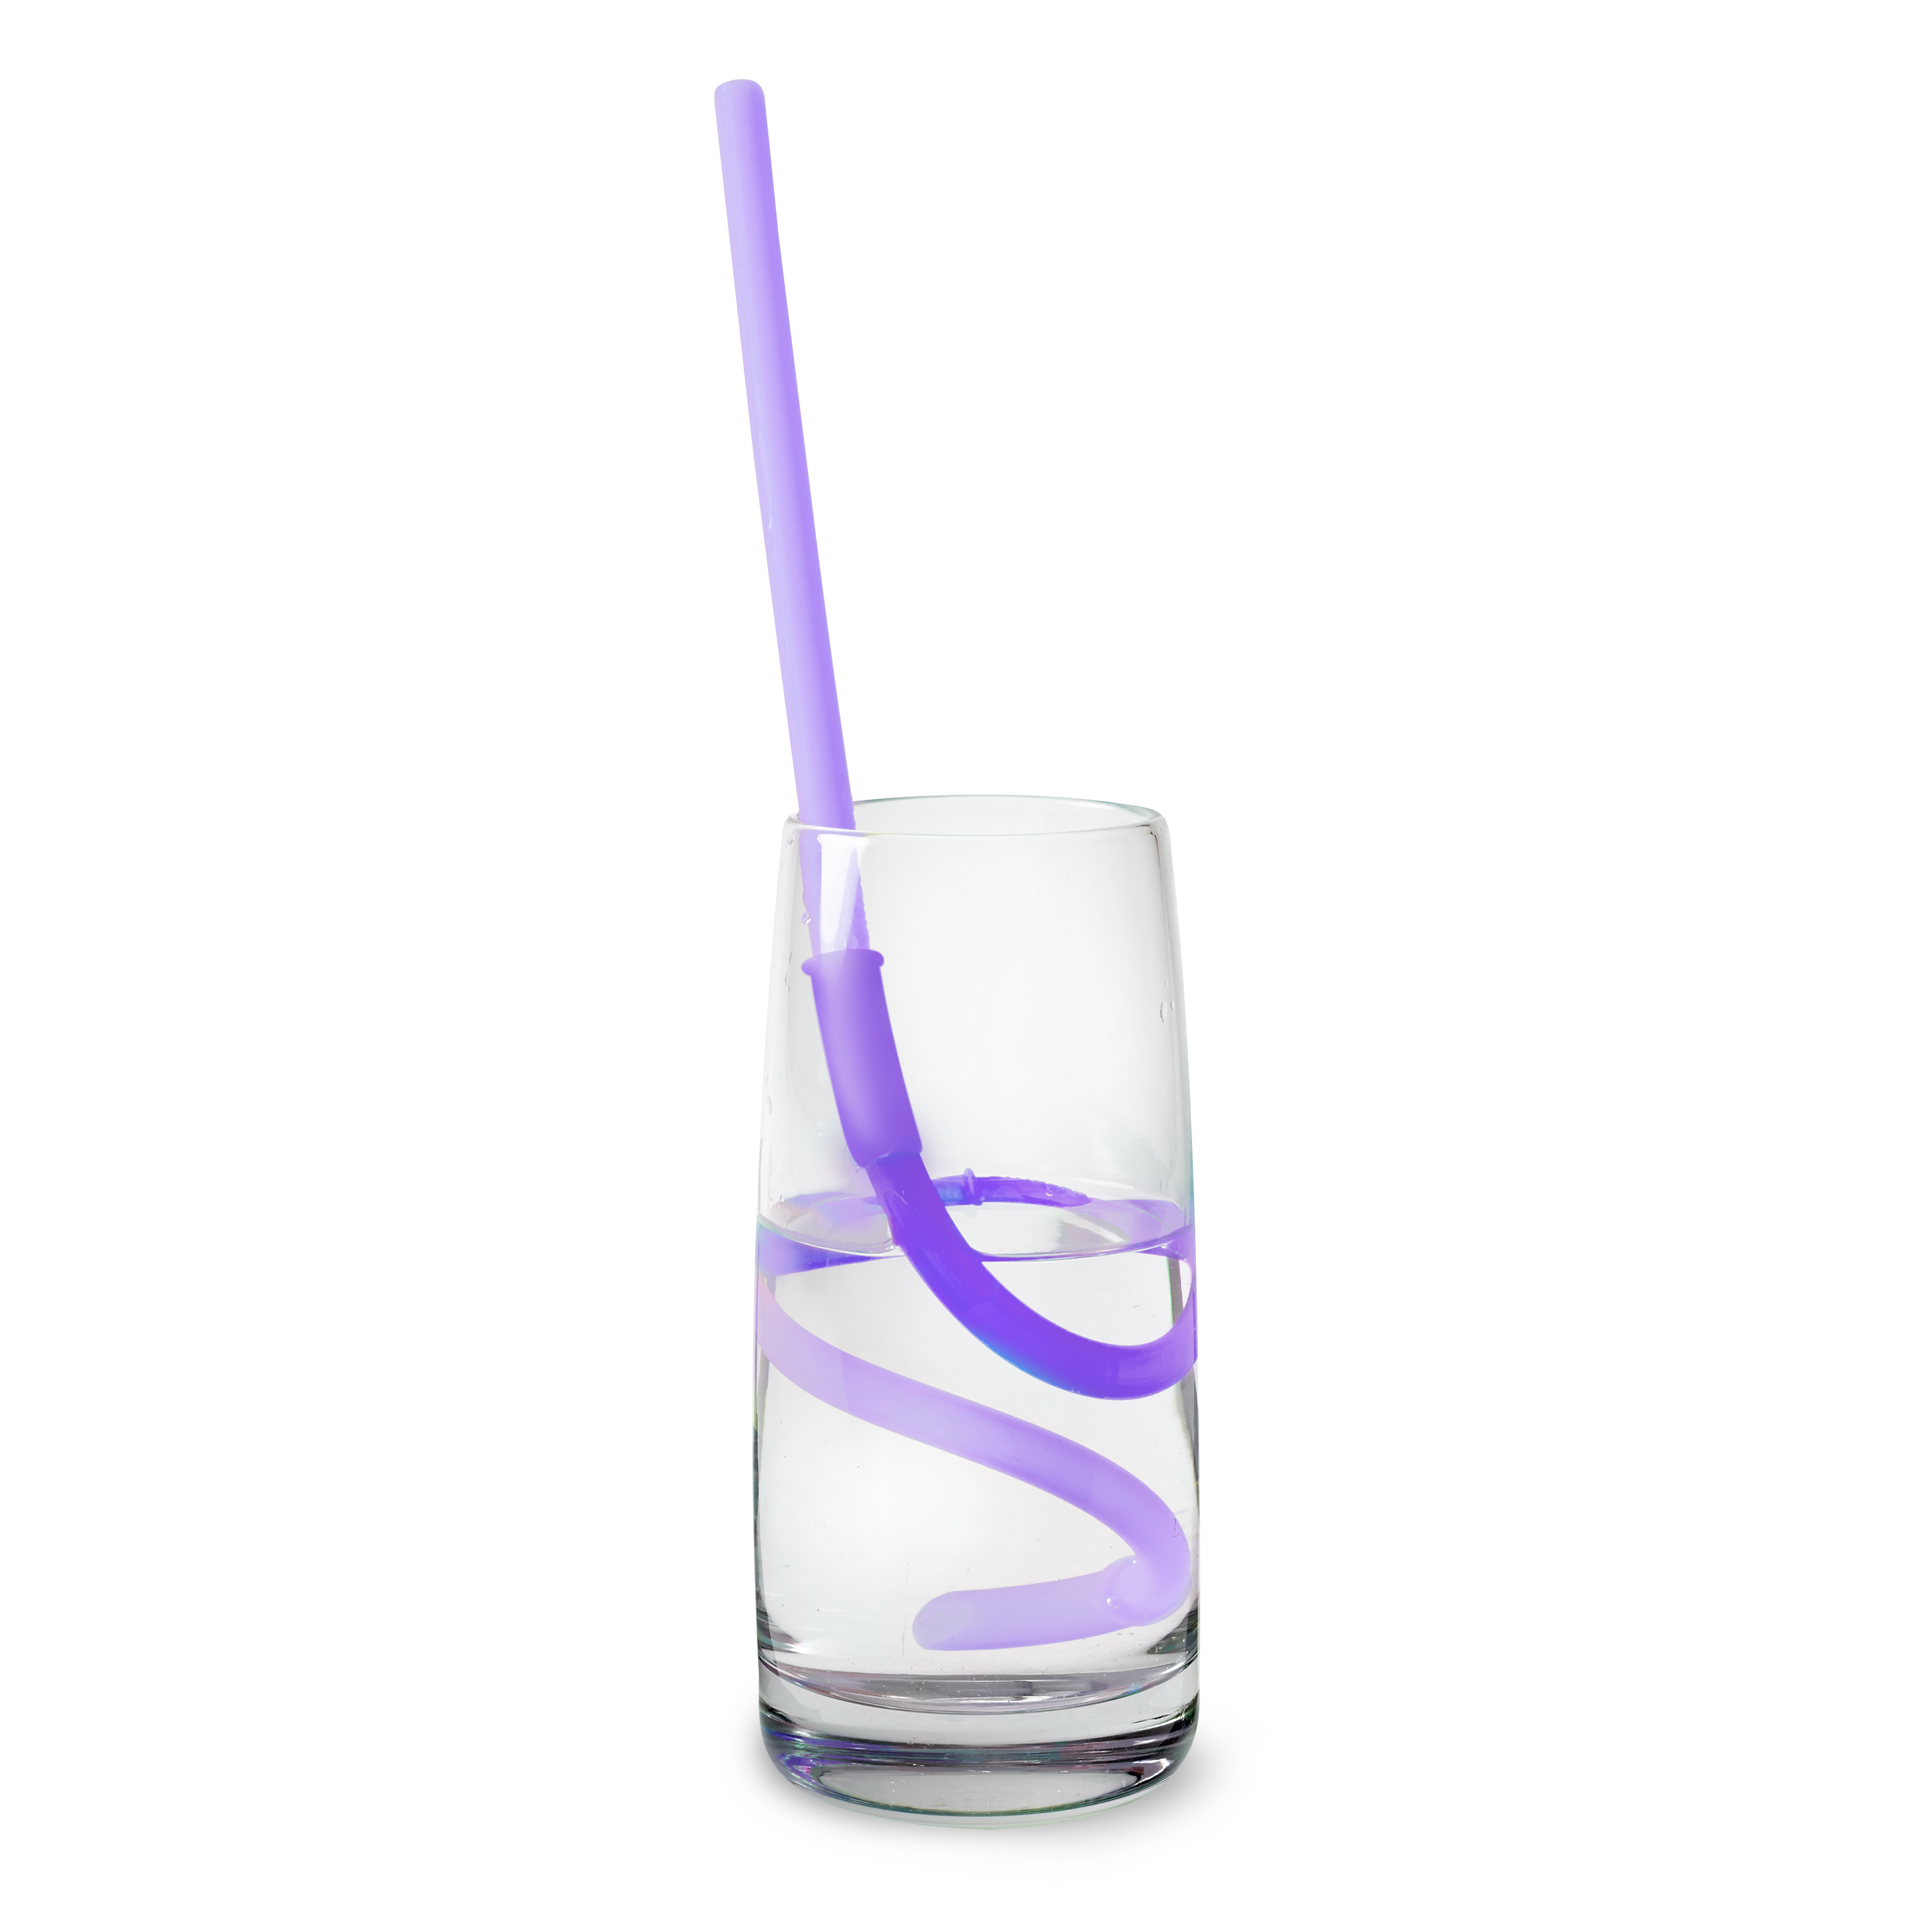 GoSili silicone straw in a glass of water